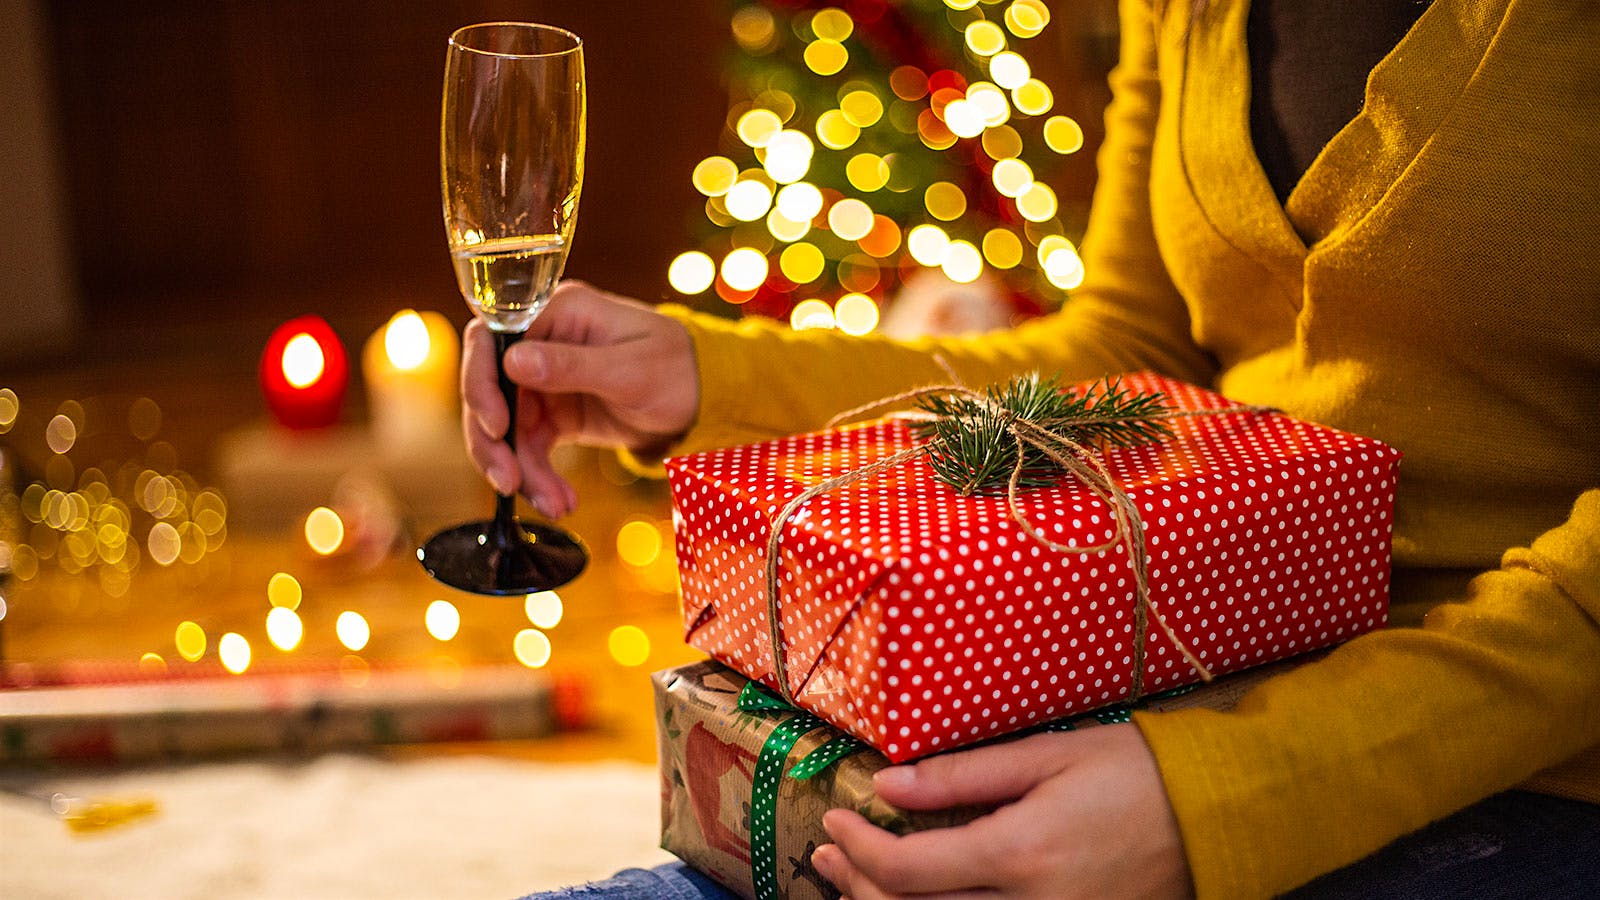 Top 5 Christmas gift ideas for wine lovers - Bordeaux Wine Trails